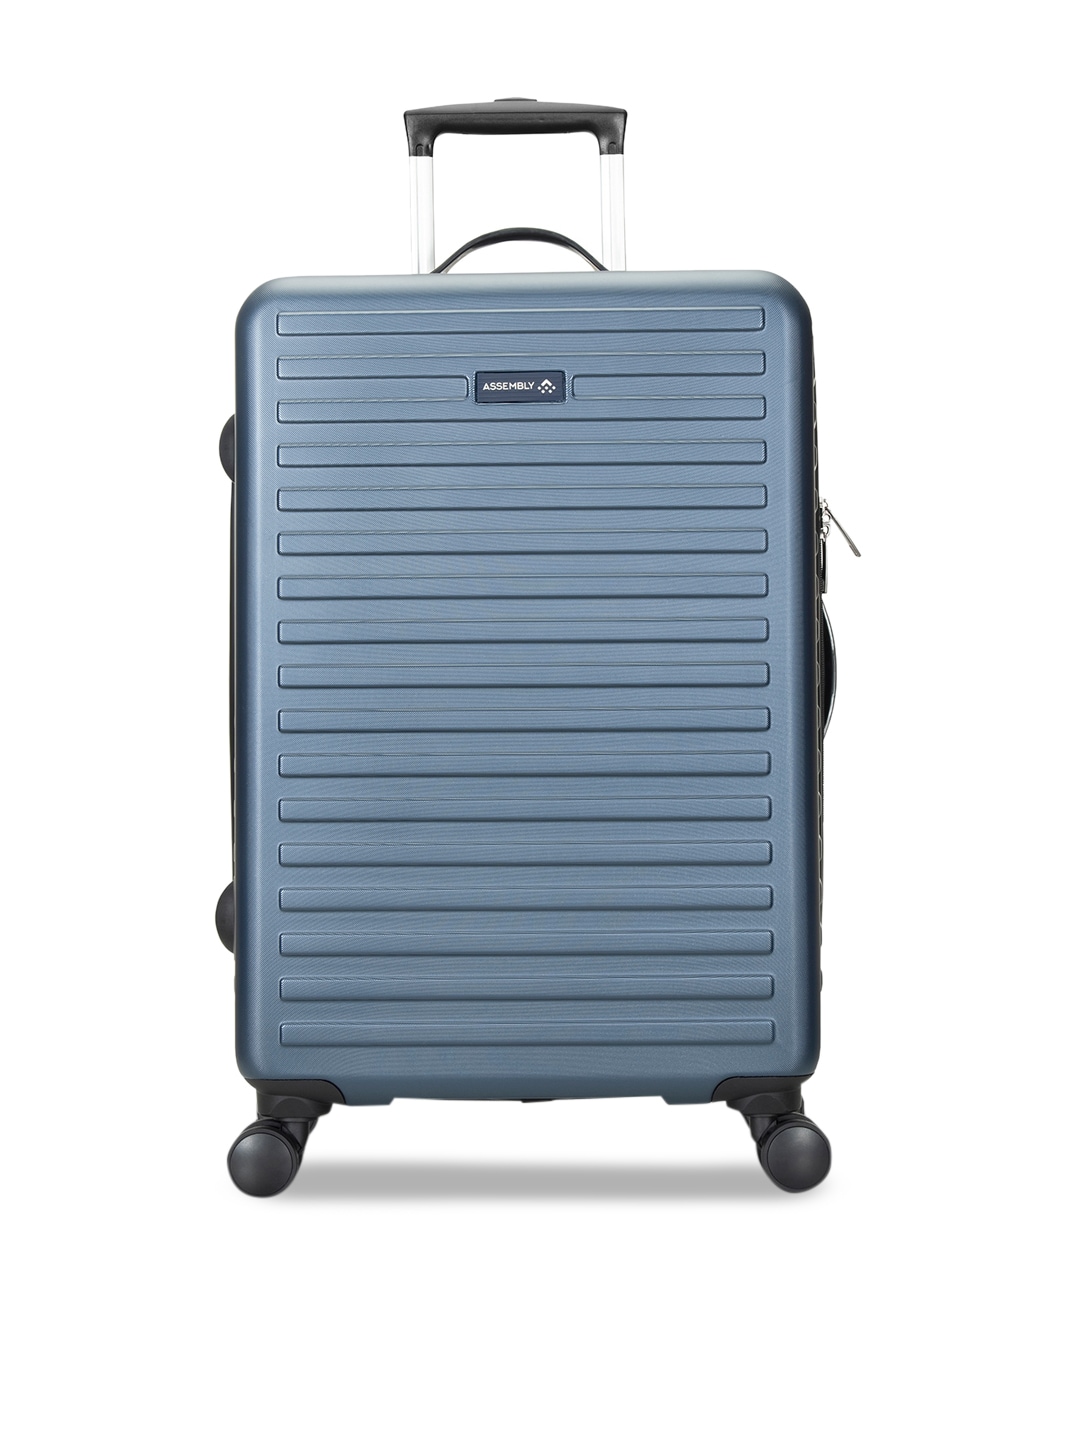 Assembly Blue Large Hardsided Trolley Bag 94 L Price in India